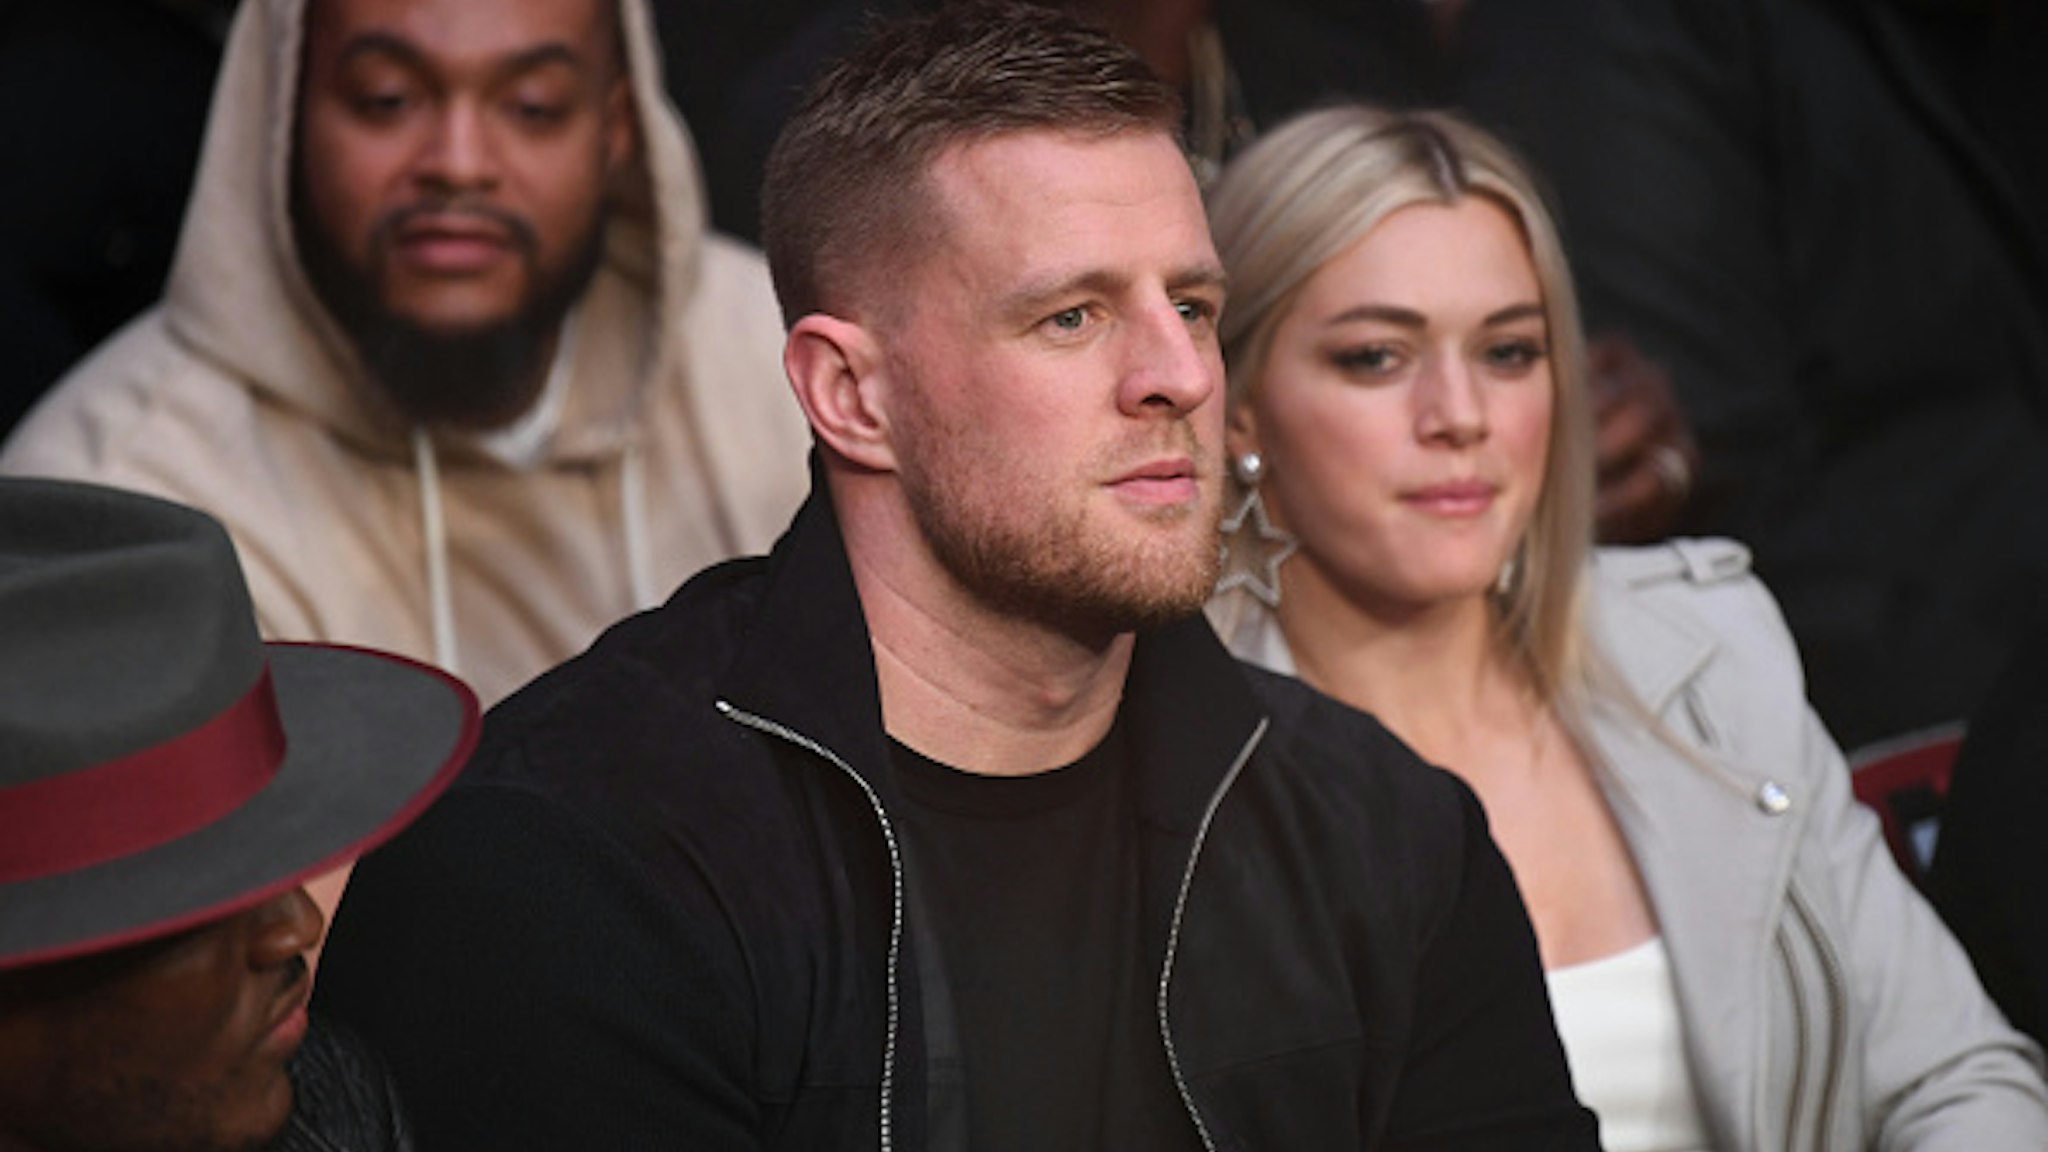 HOUSTON, TEXAS - FEBRUARY 08: NFL player J.J. Watt is seen in attendance during the UFC 247 event at Toyota Center on February 08, 2020 in Houston, Texas.